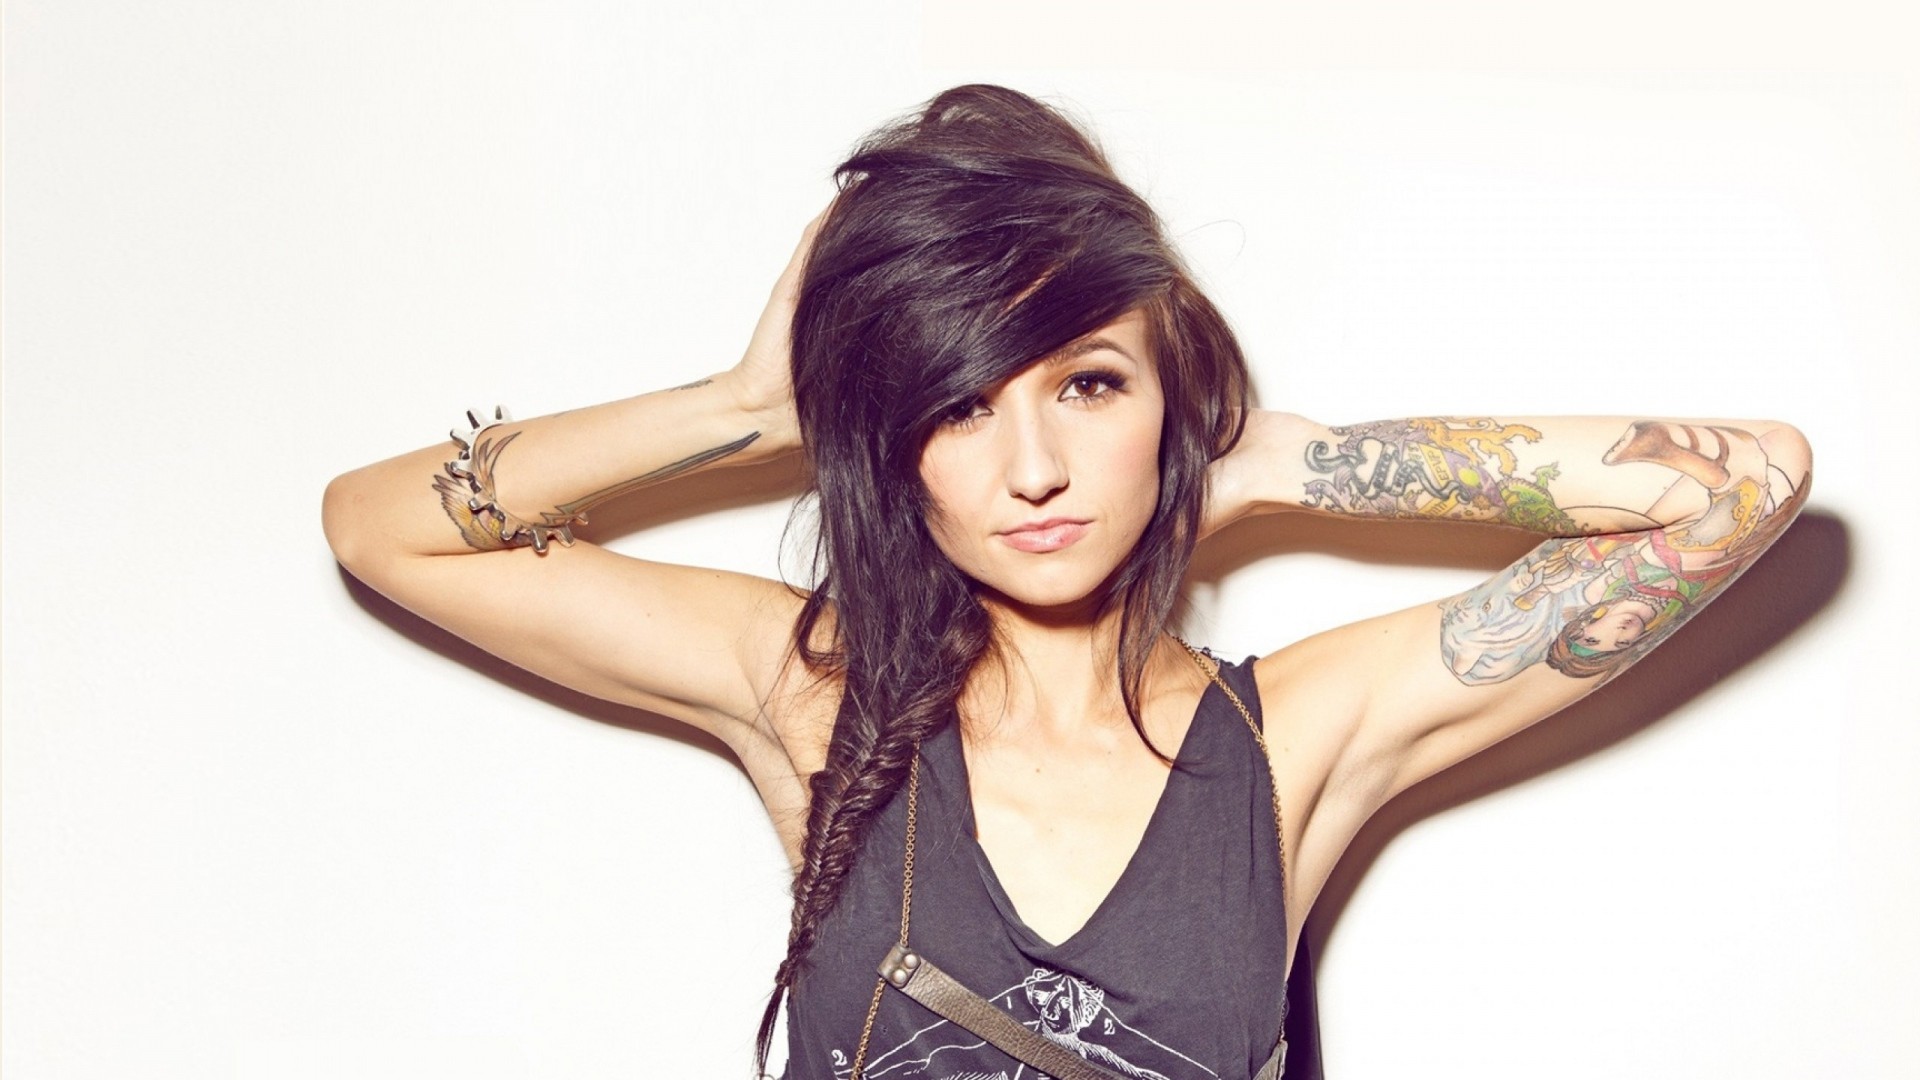 1920x1080 Preview wallpaper girl, brunette, style, hand, tattoos, charm, swag  